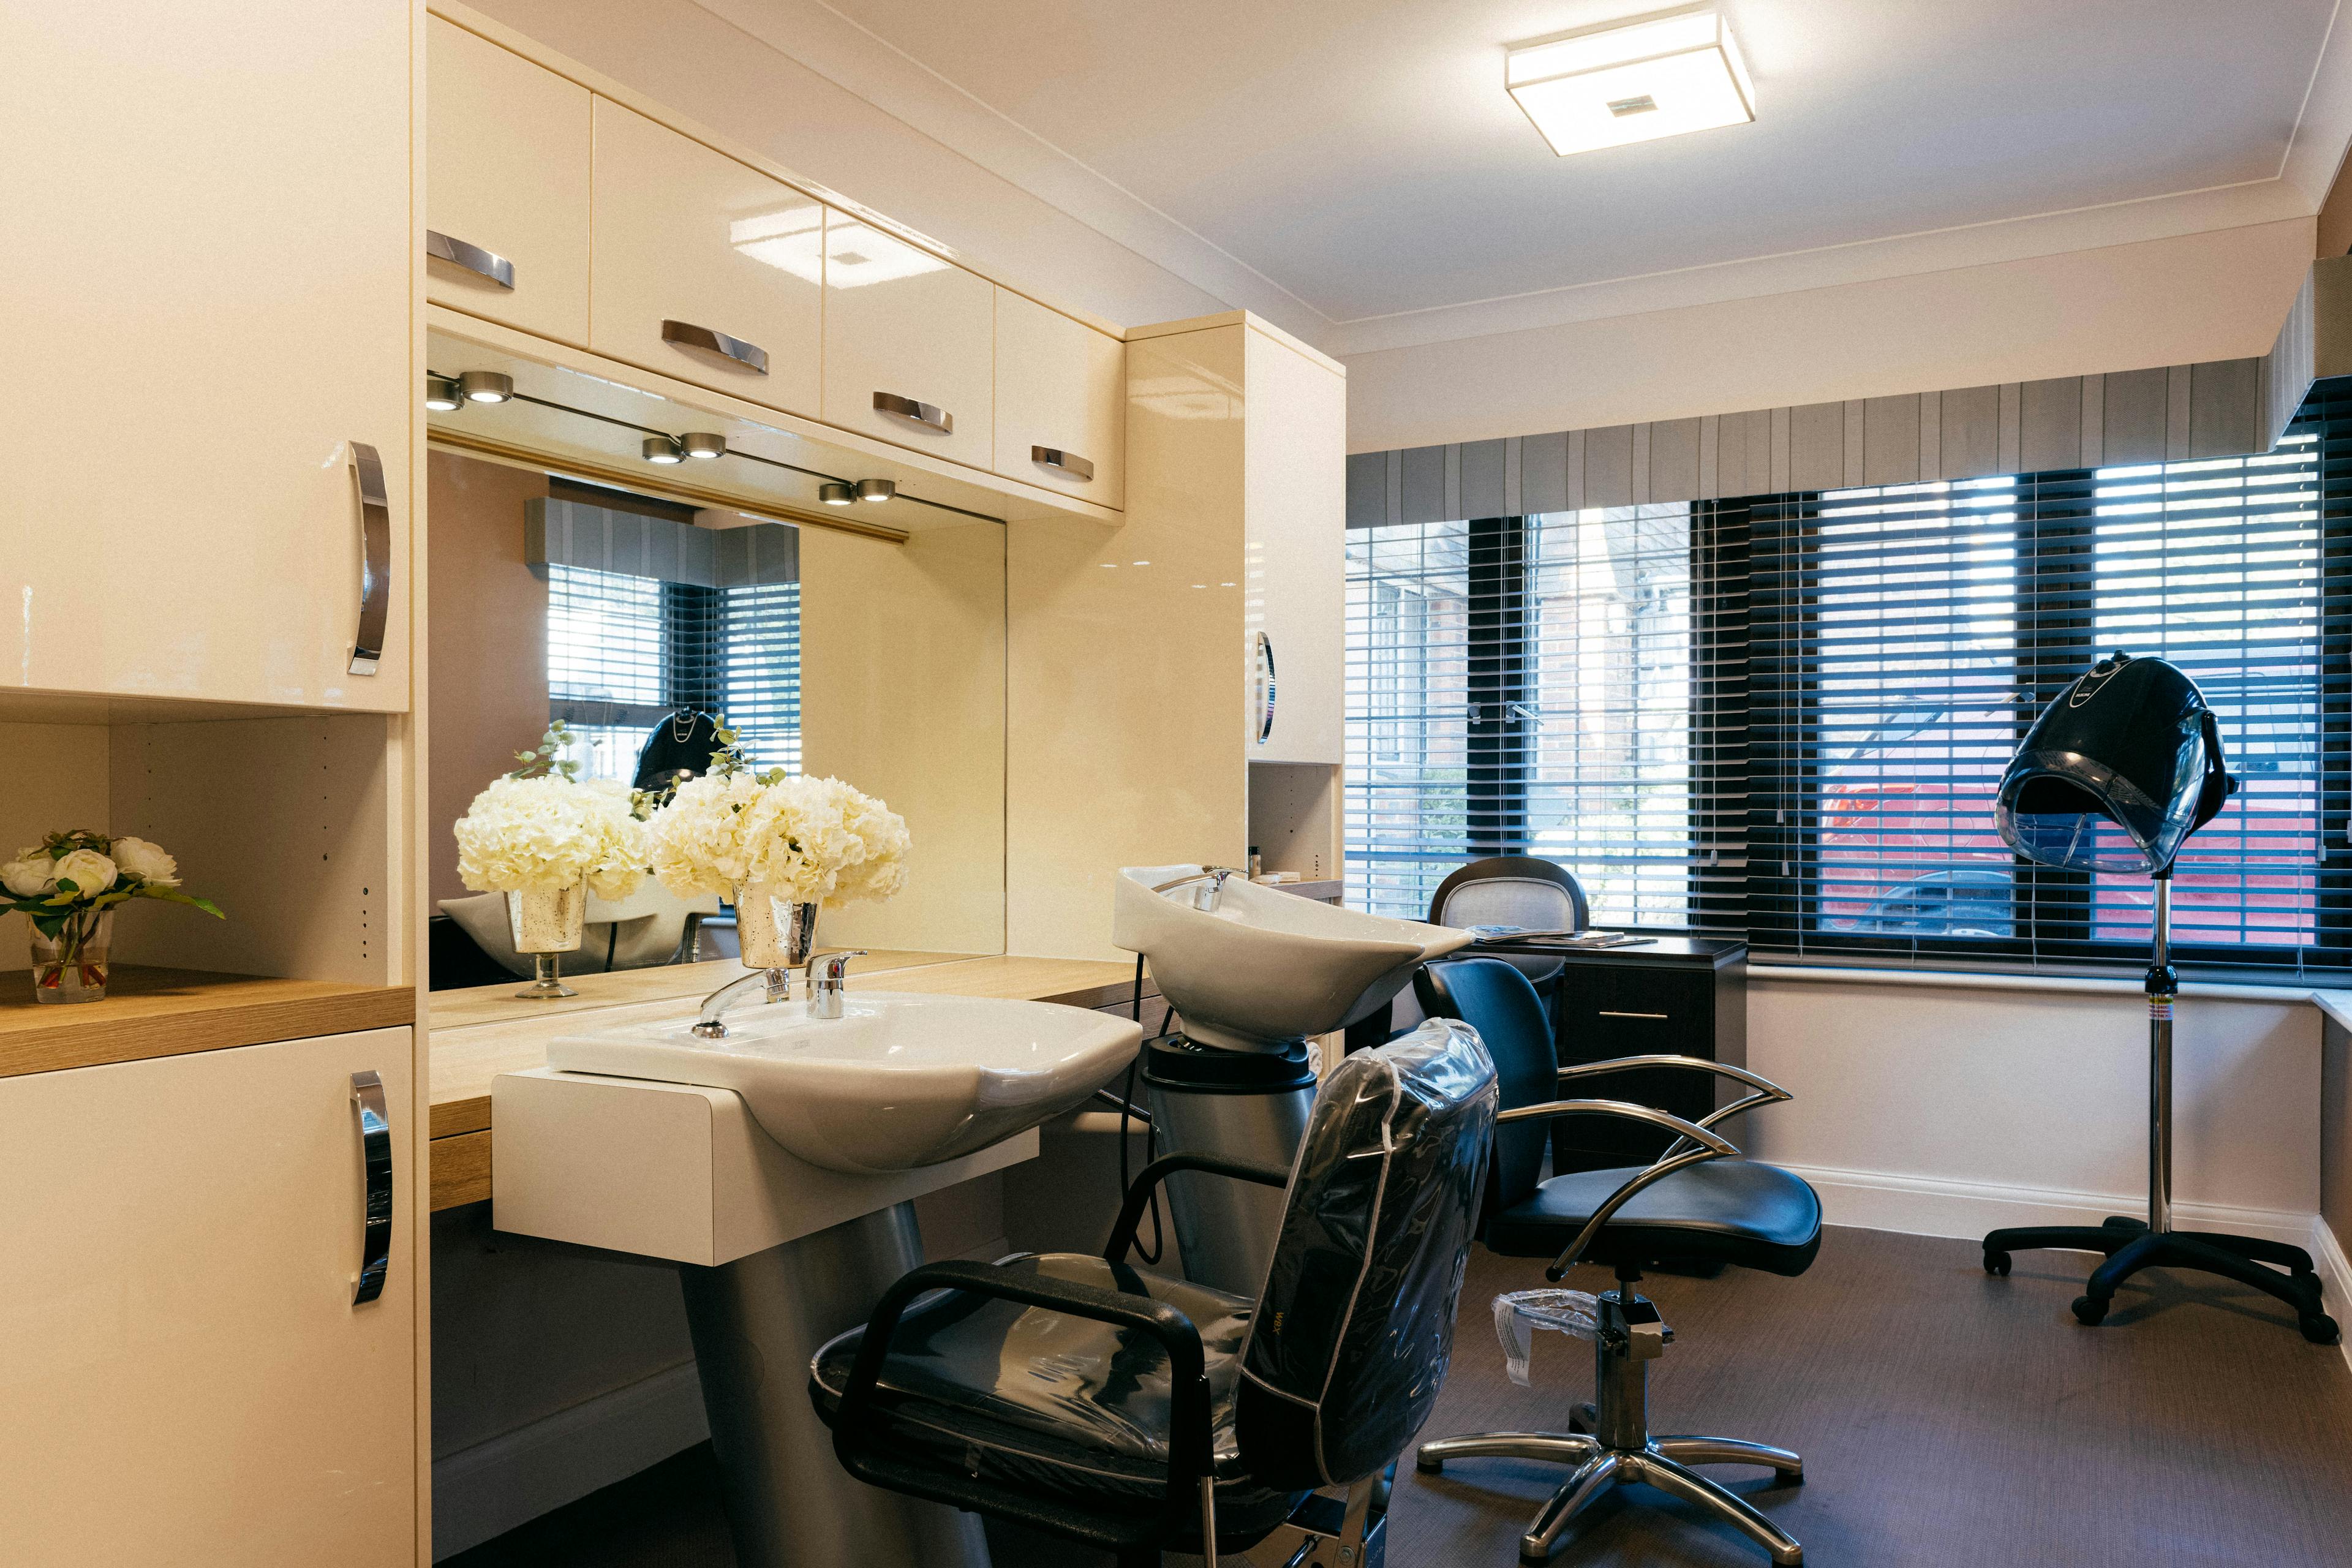 Salon at Reigate Beaumont Care Home in Reigate, Surrey